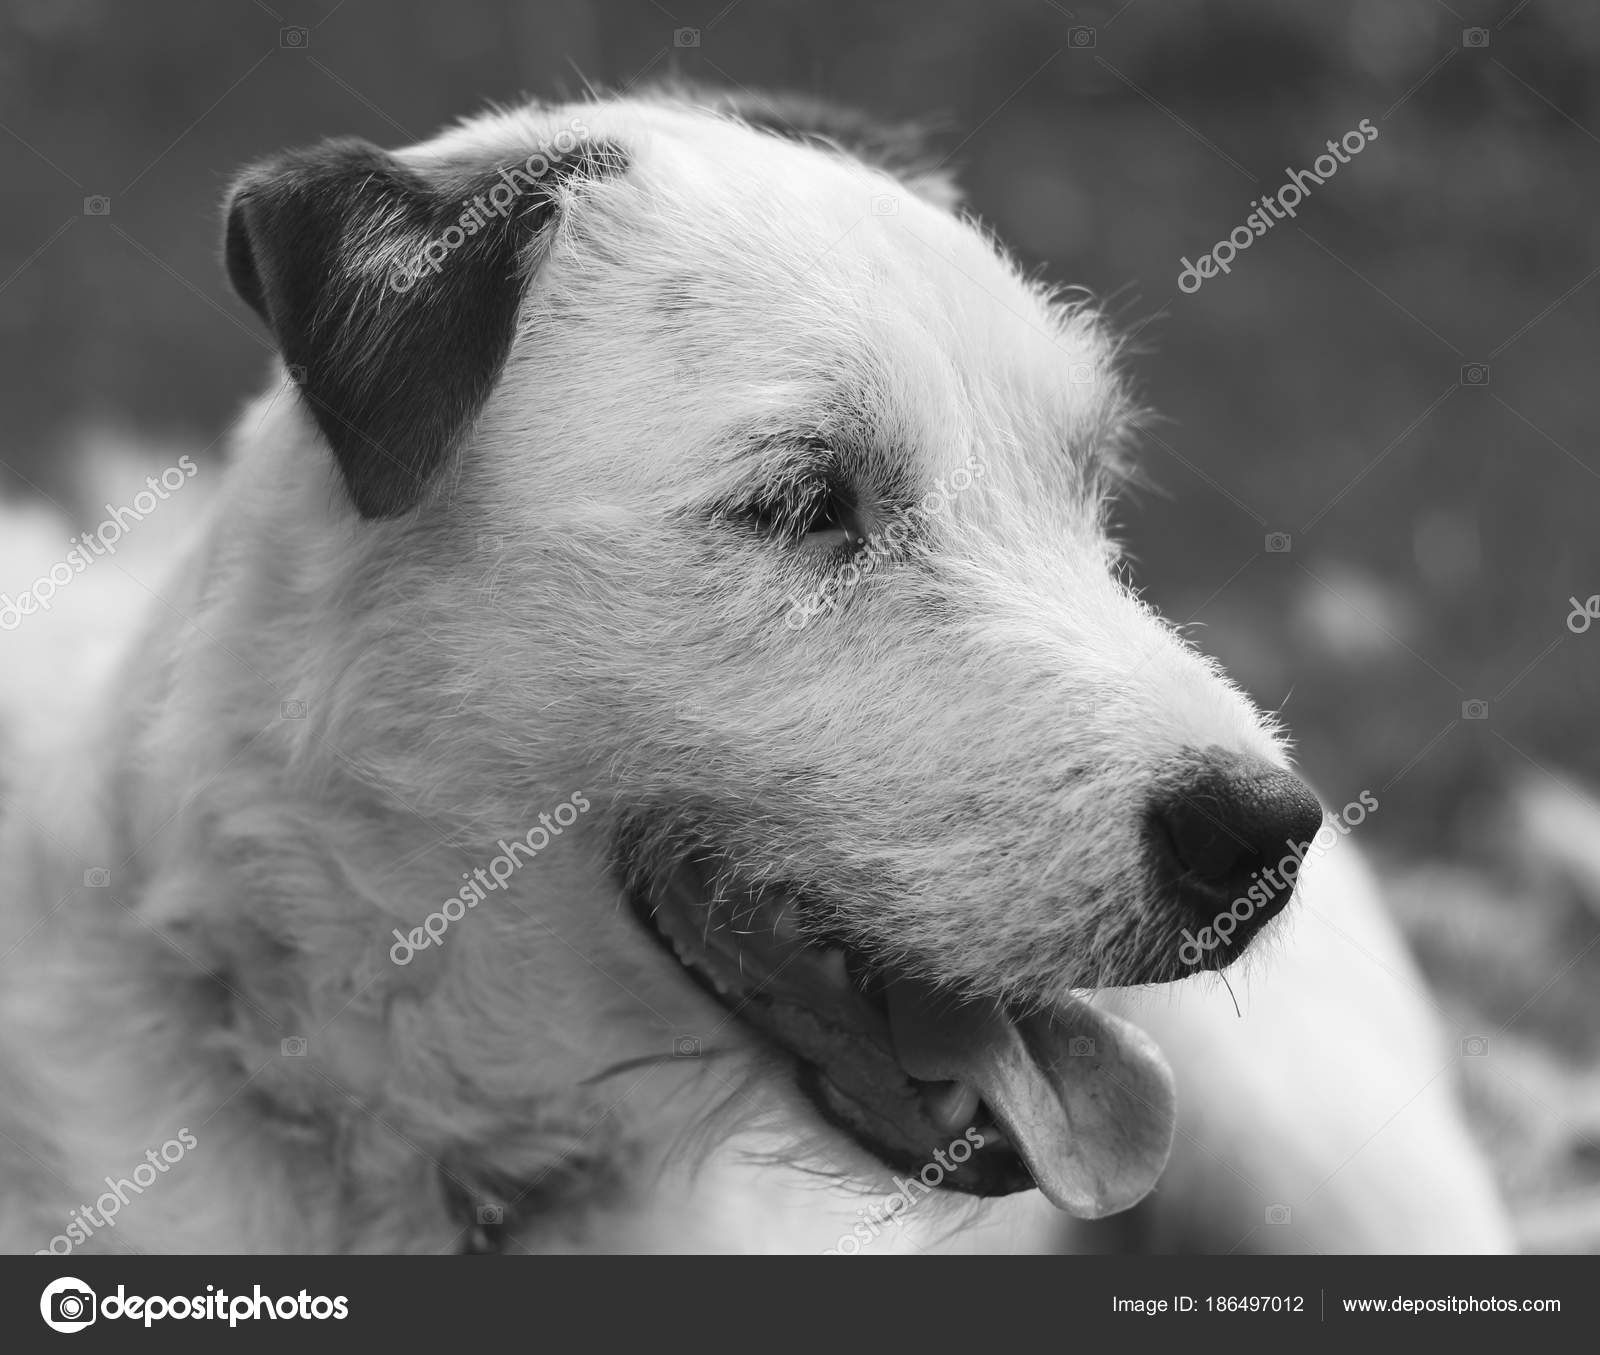 Very Cute White And Brown Colored Parson Russell Terrier Relaxing Nice Details And Photo In Black And White Stock Photo C Jezepidesigns 186497012